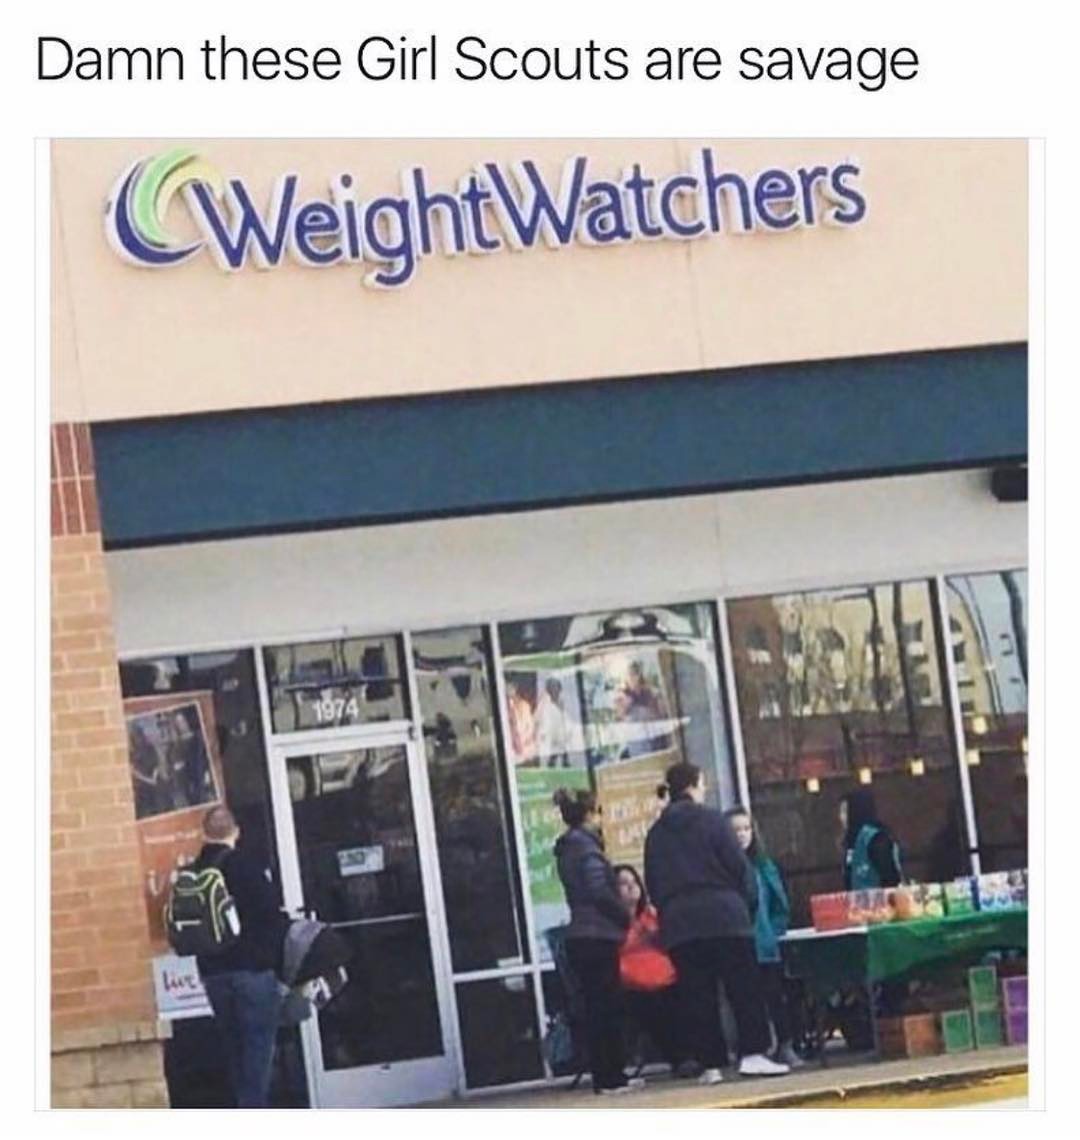 Damn these Girl Scouts are savage.